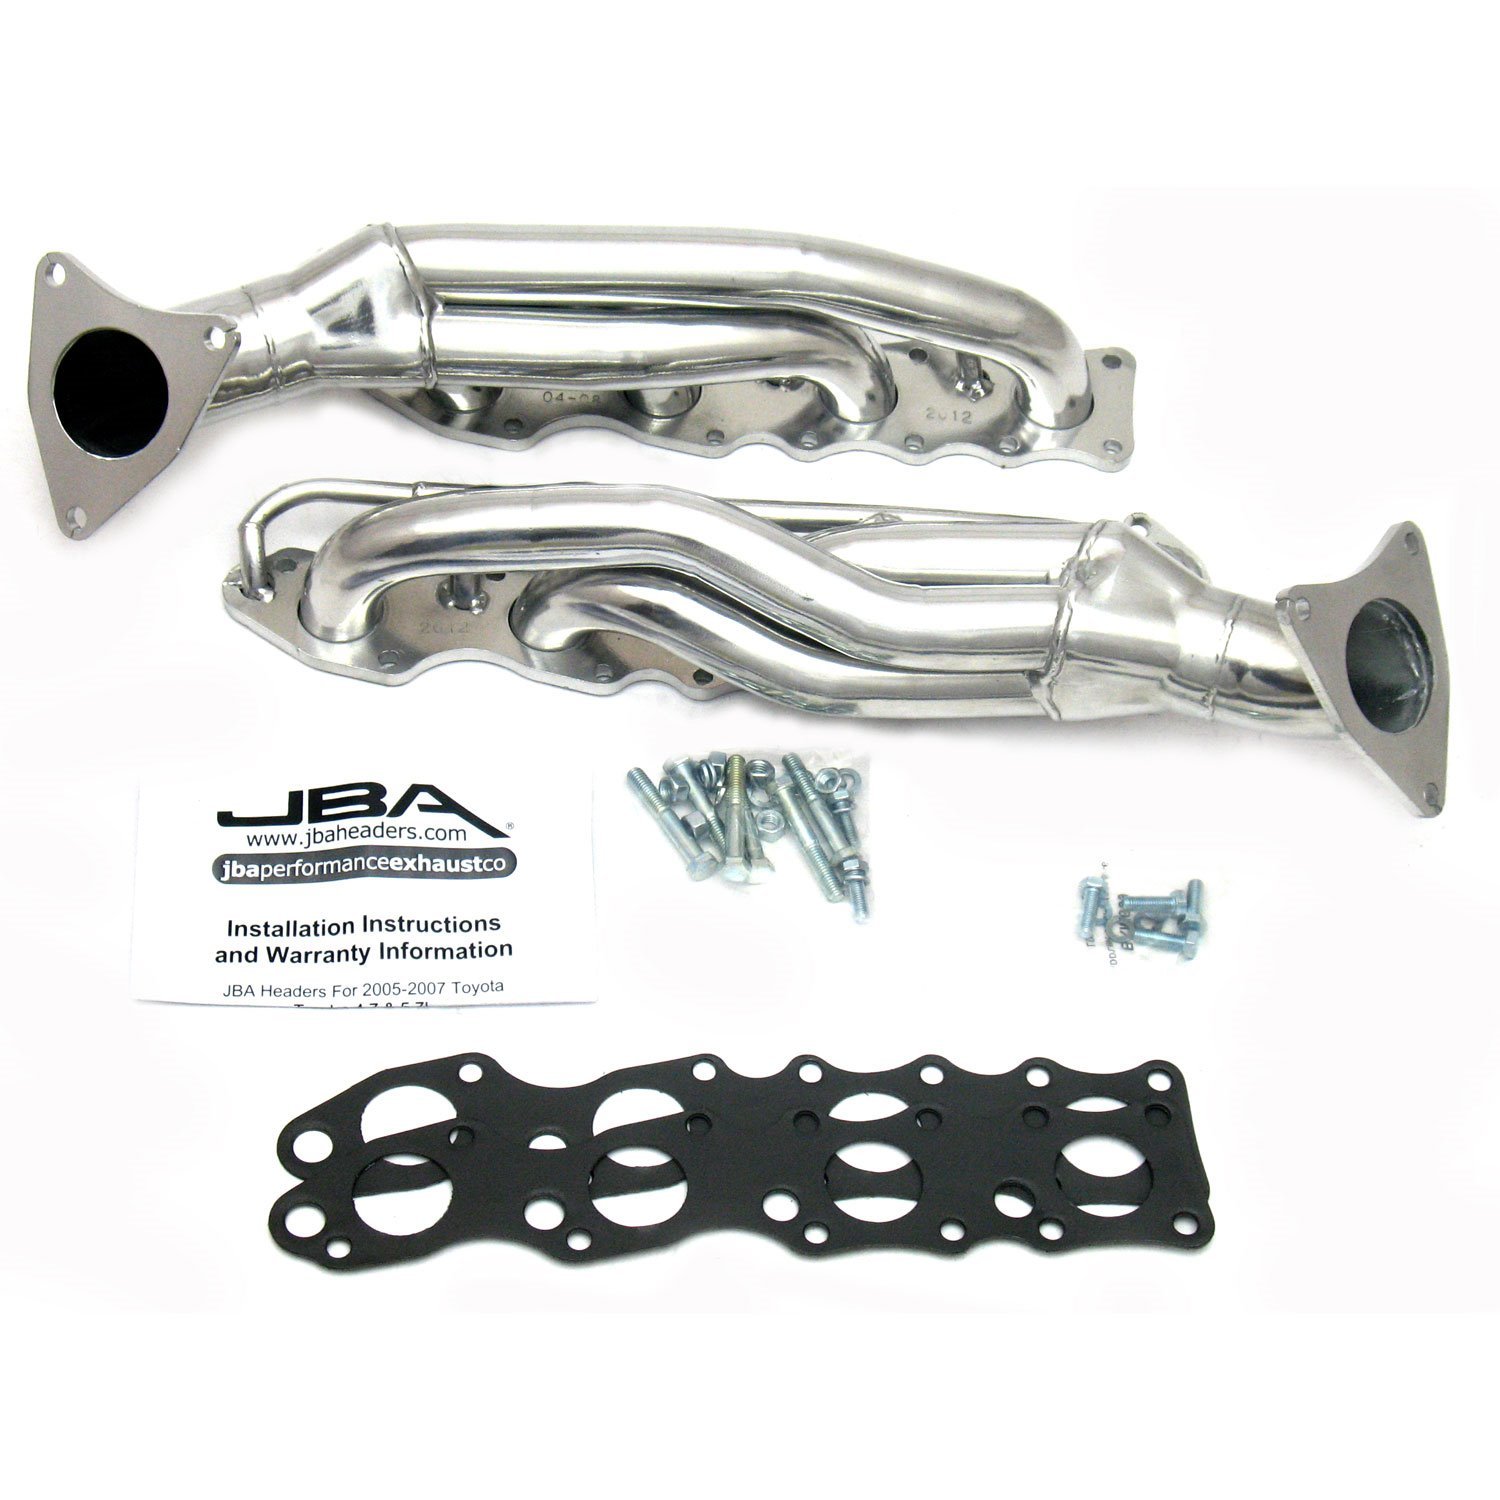 Shorty Headers 2007-2014 Toyota Tundra and Sequoia 5.7L